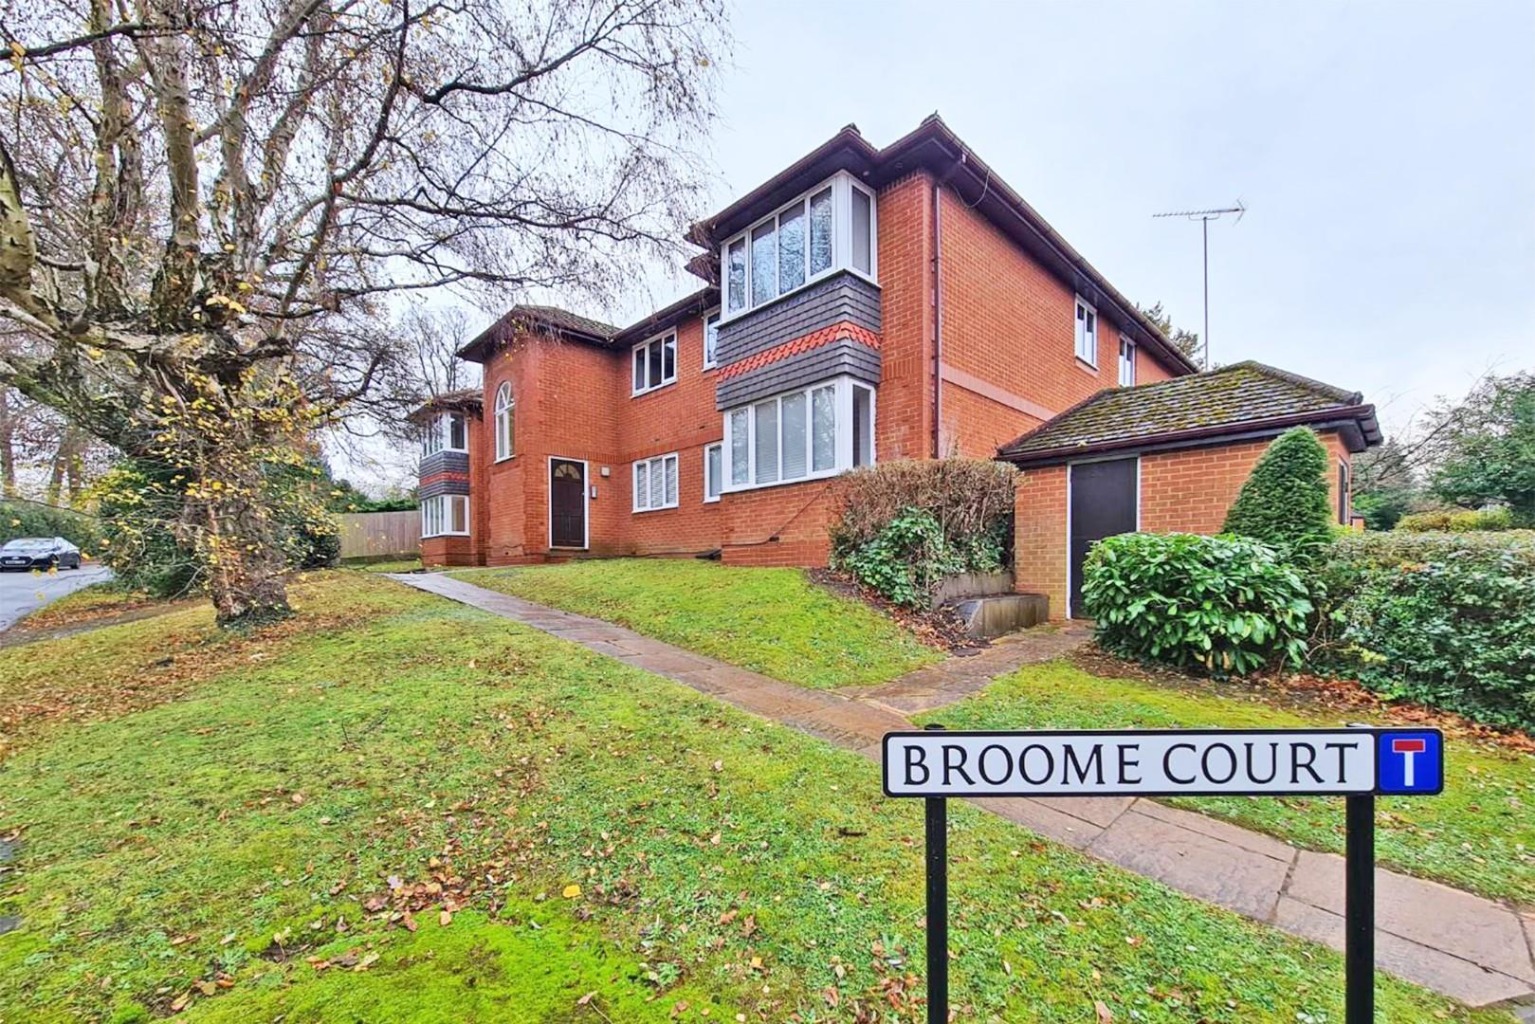 2 bed flat for sale in Broome Court, Bracknell, RG12